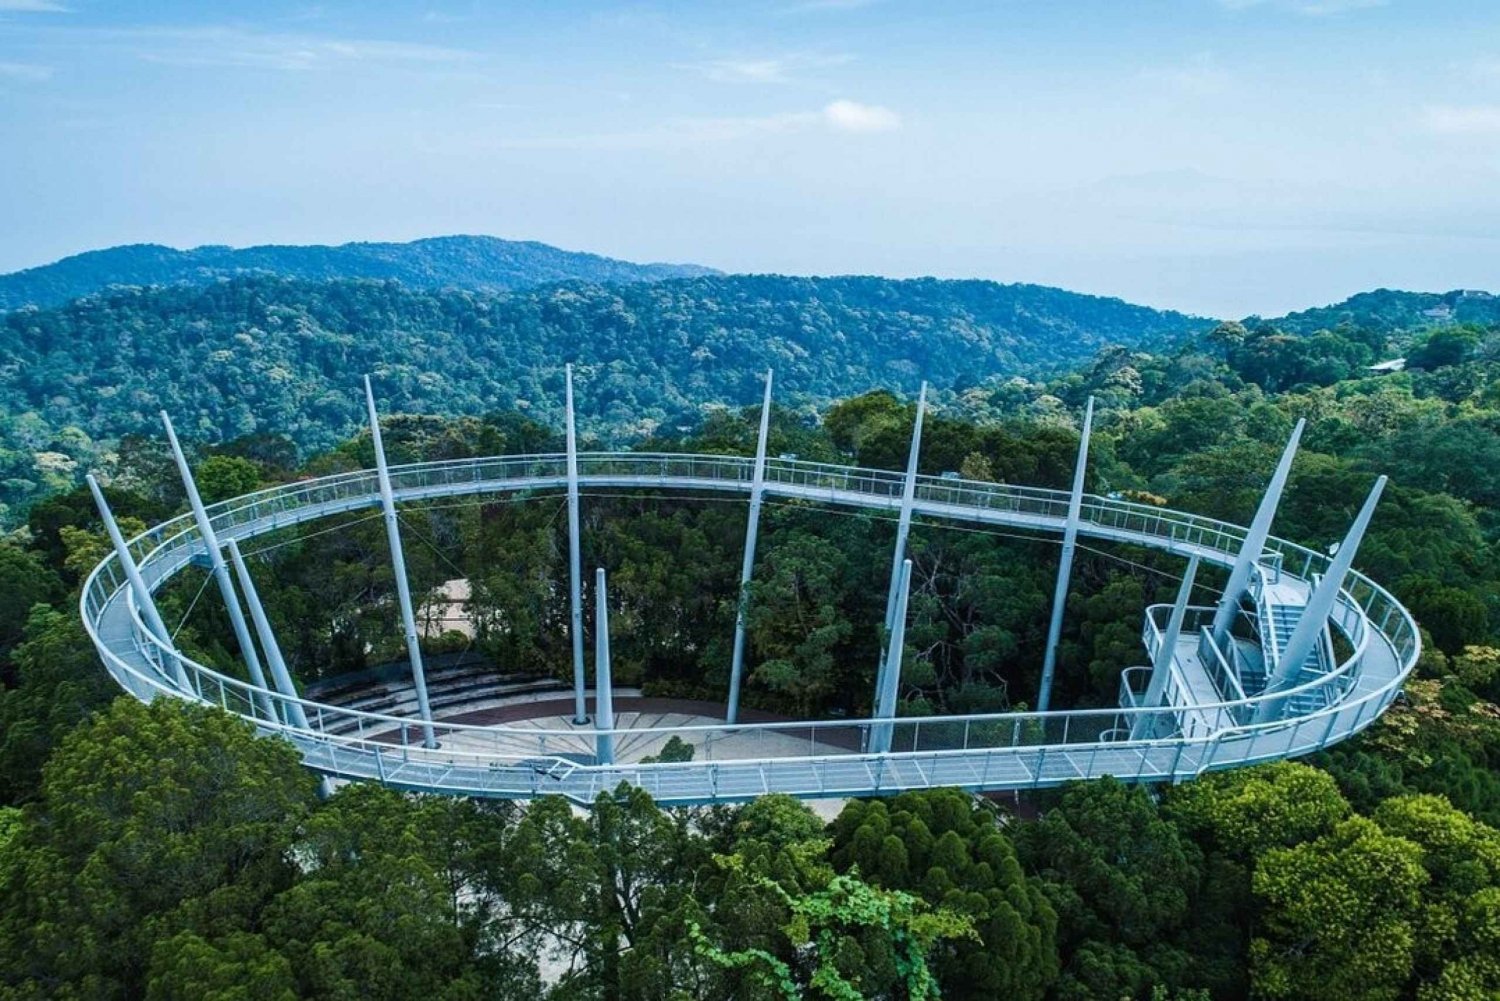 George Town: 'The Habitat Penang Hill' Admission Ticket